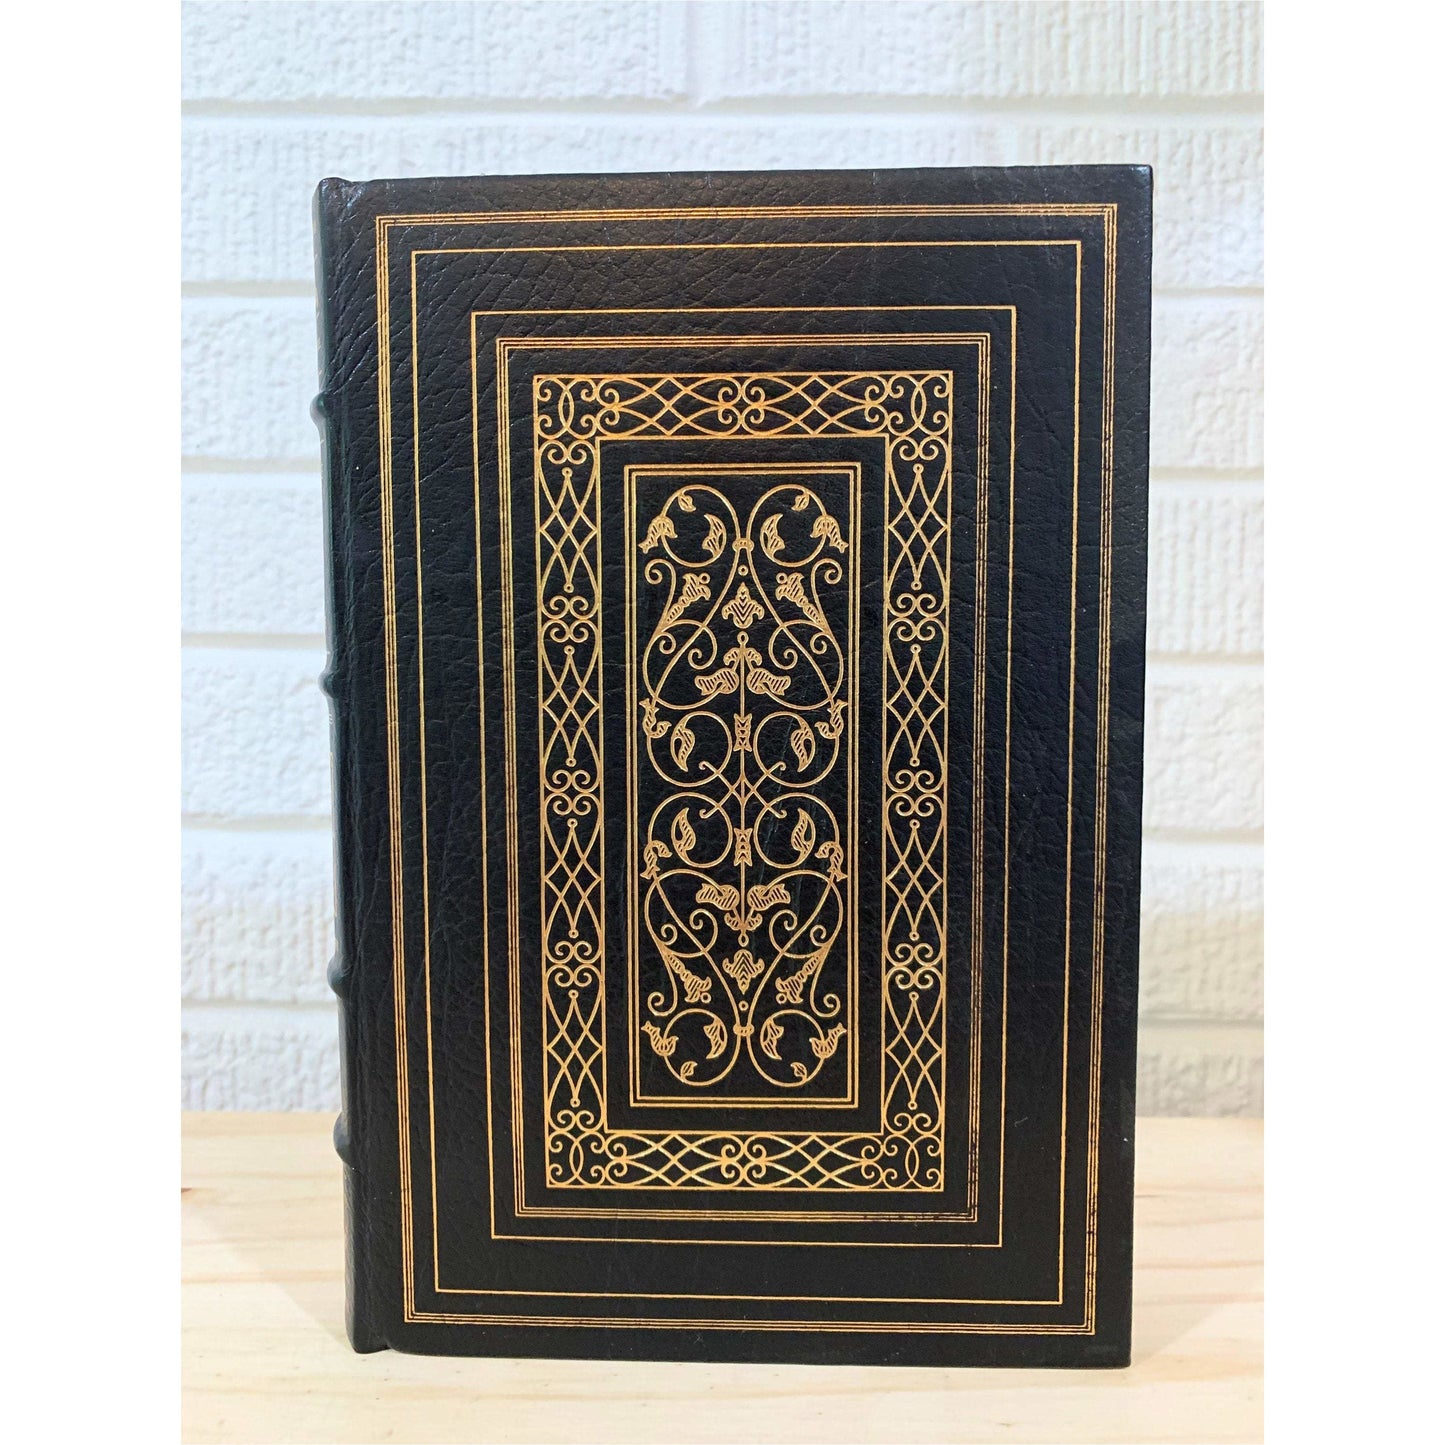 The House of the Seven Gables, Nathaniel Hawthorne, Franklin Library, Ornate Leather Book